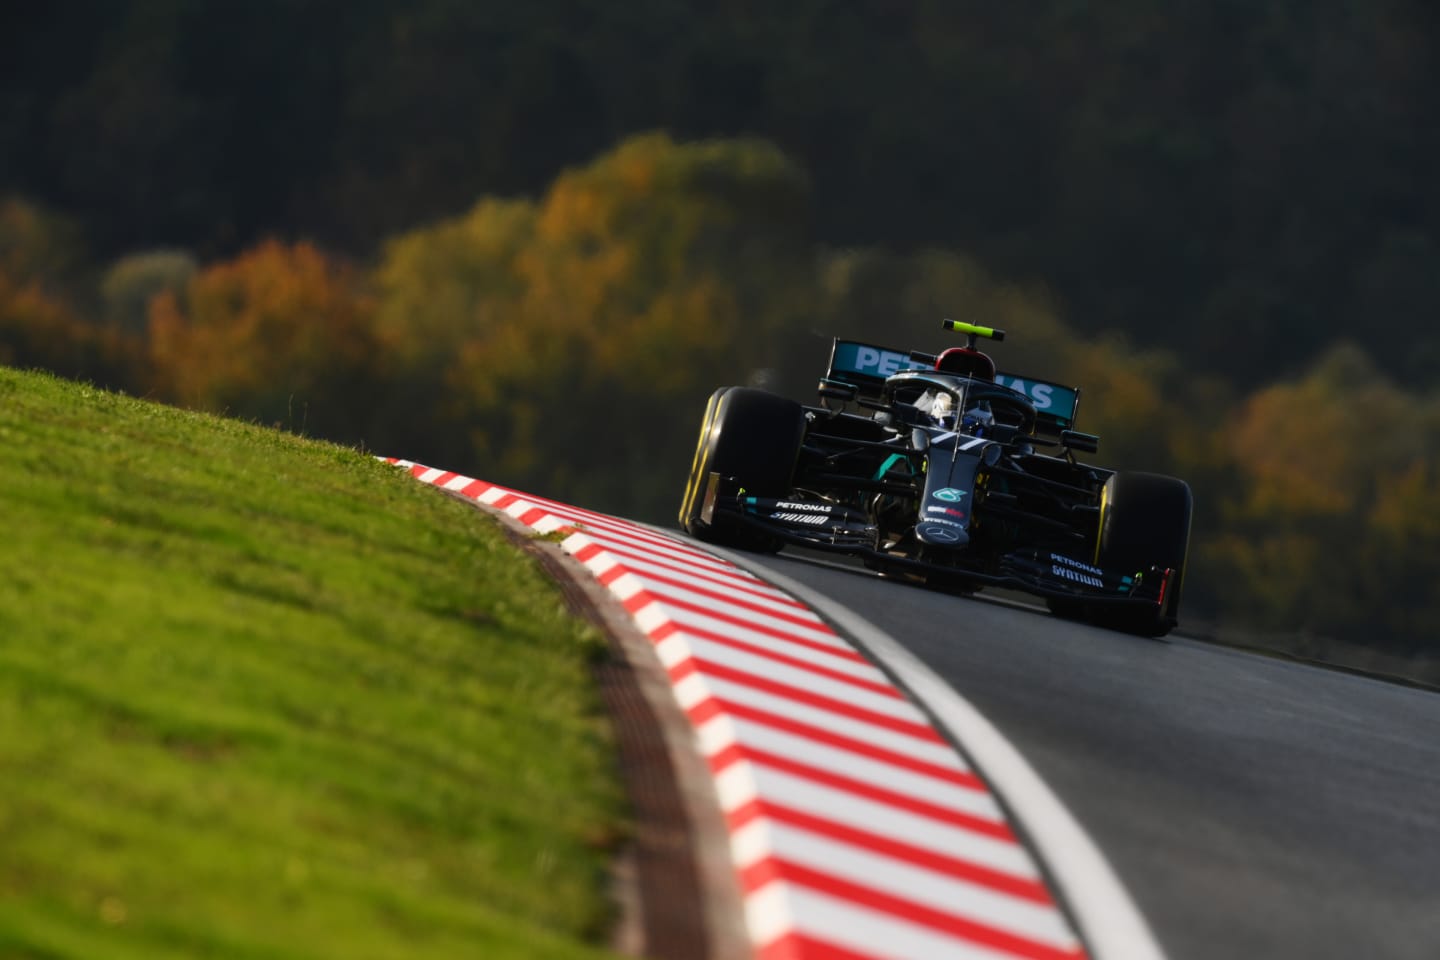 ISTANBUL, TURKEY - NOVEMBER 13: Valtteri Bottas of Finland driving the (77) Mercedes AMG Petronas F1 Team Mercedes W11 on track during practice ahead of the F1 Grand Prix of Turkey at Intercity Istanbul Park on November 13, 2020 in Istanbul, Turkey. (Photo by Clive Mason/Getty Images)